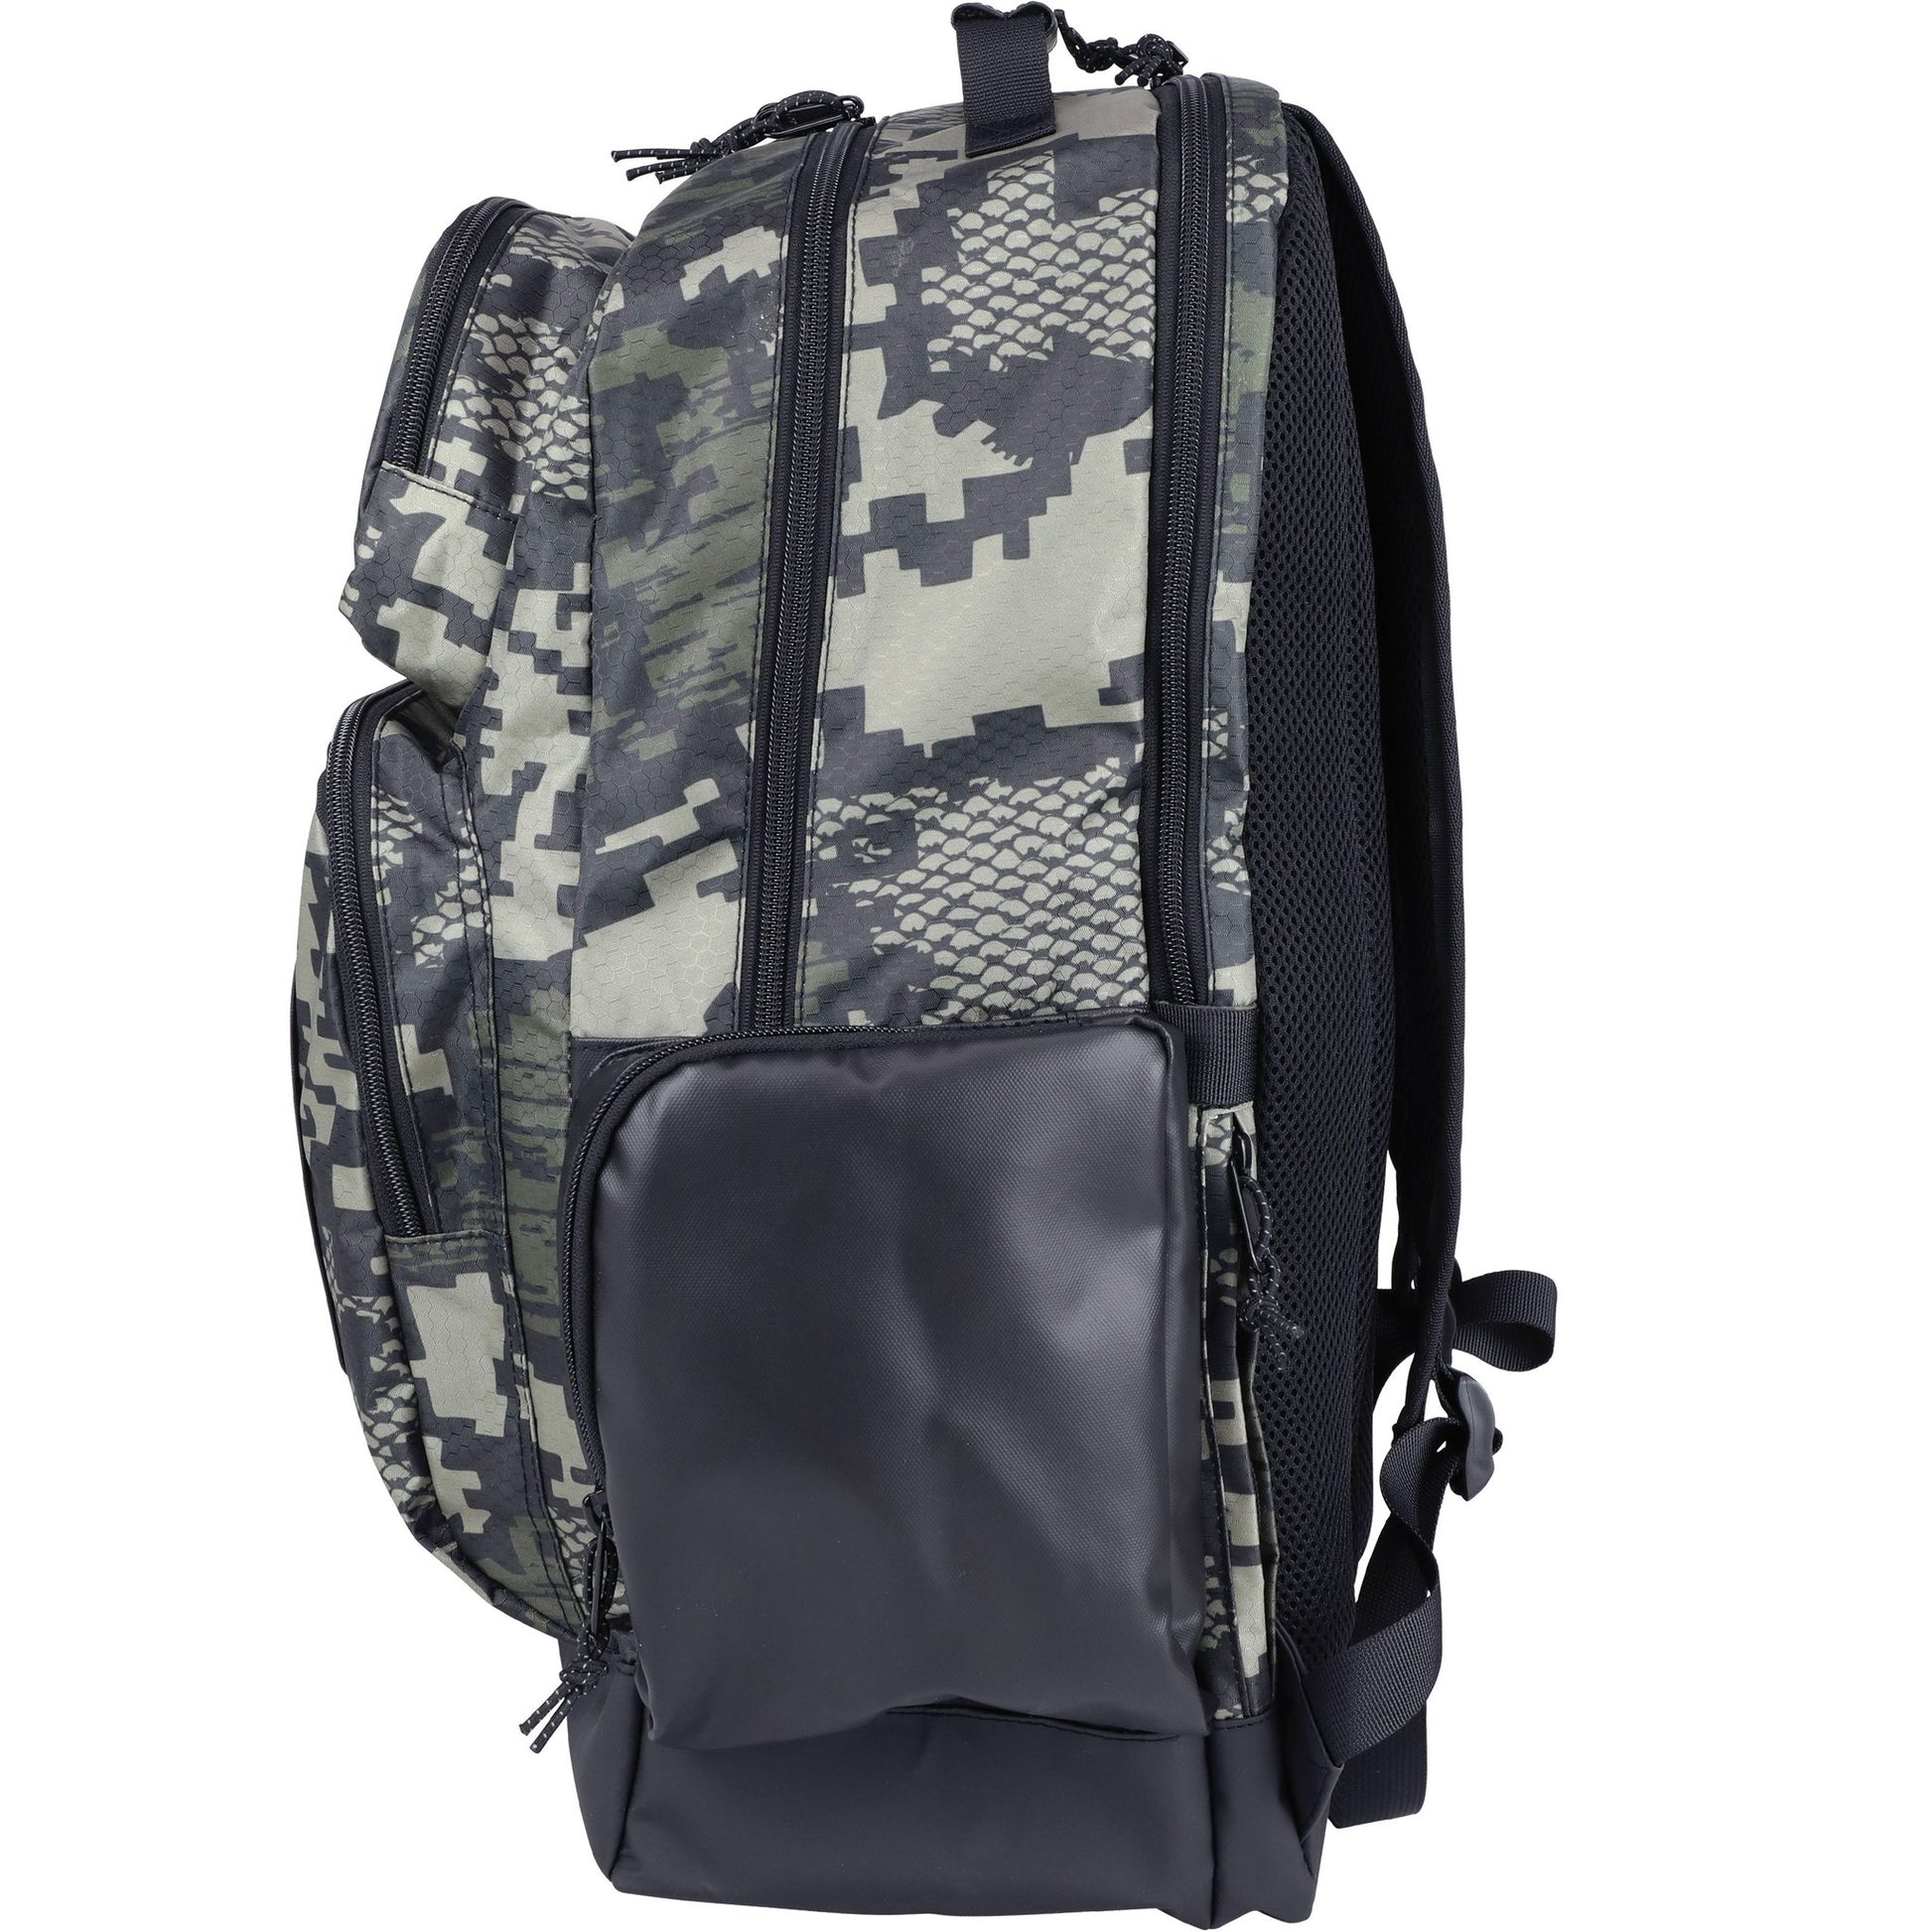 Calcutta Squall 3600 Tactical Tackle Backpack